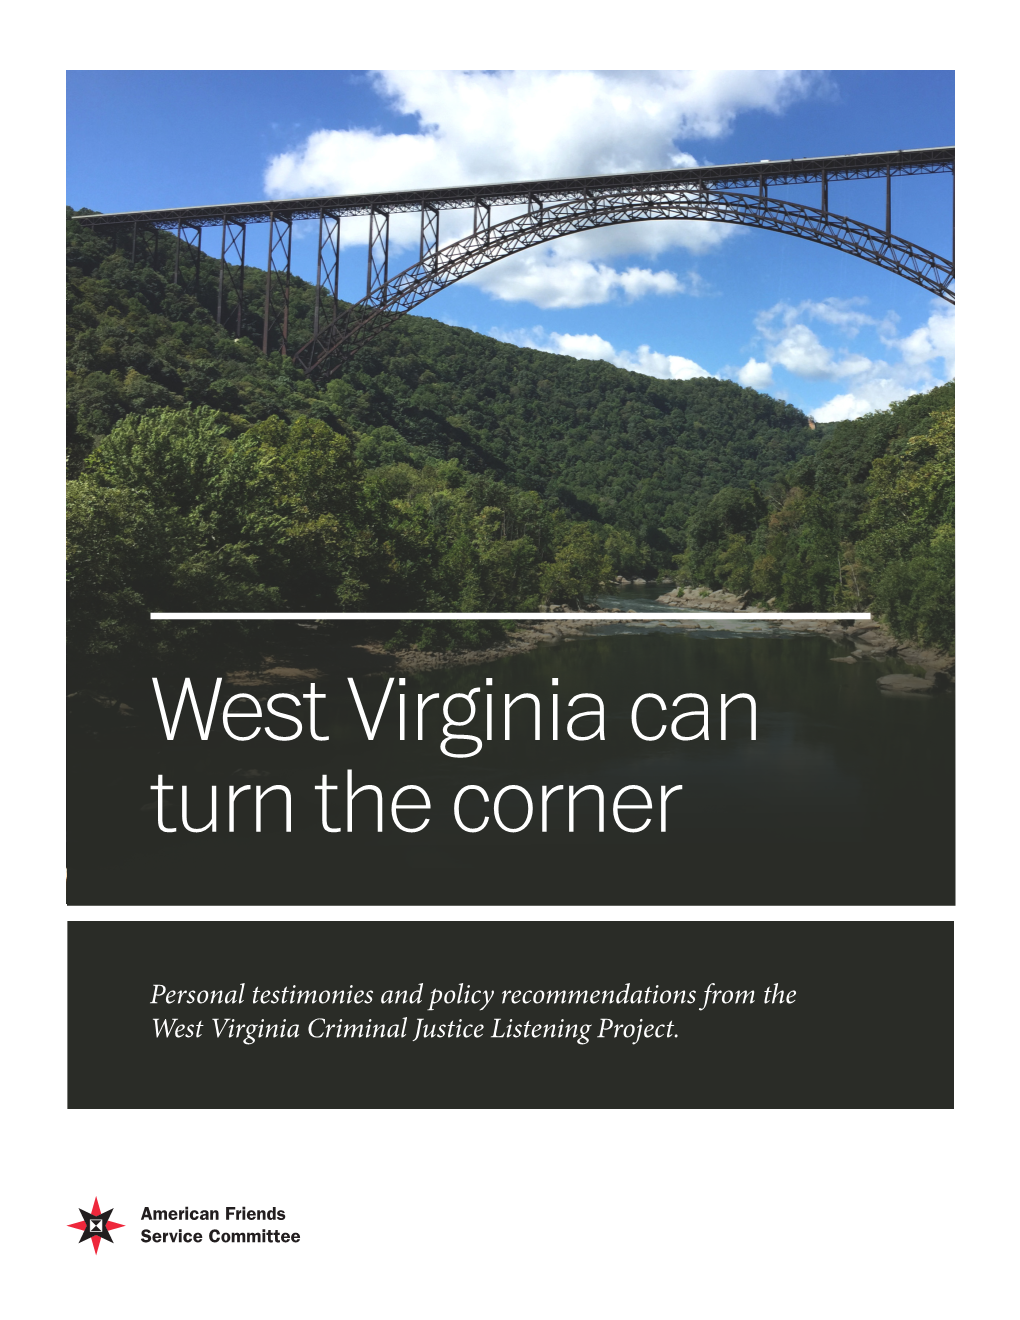 West Virginia Can Turn the Corner